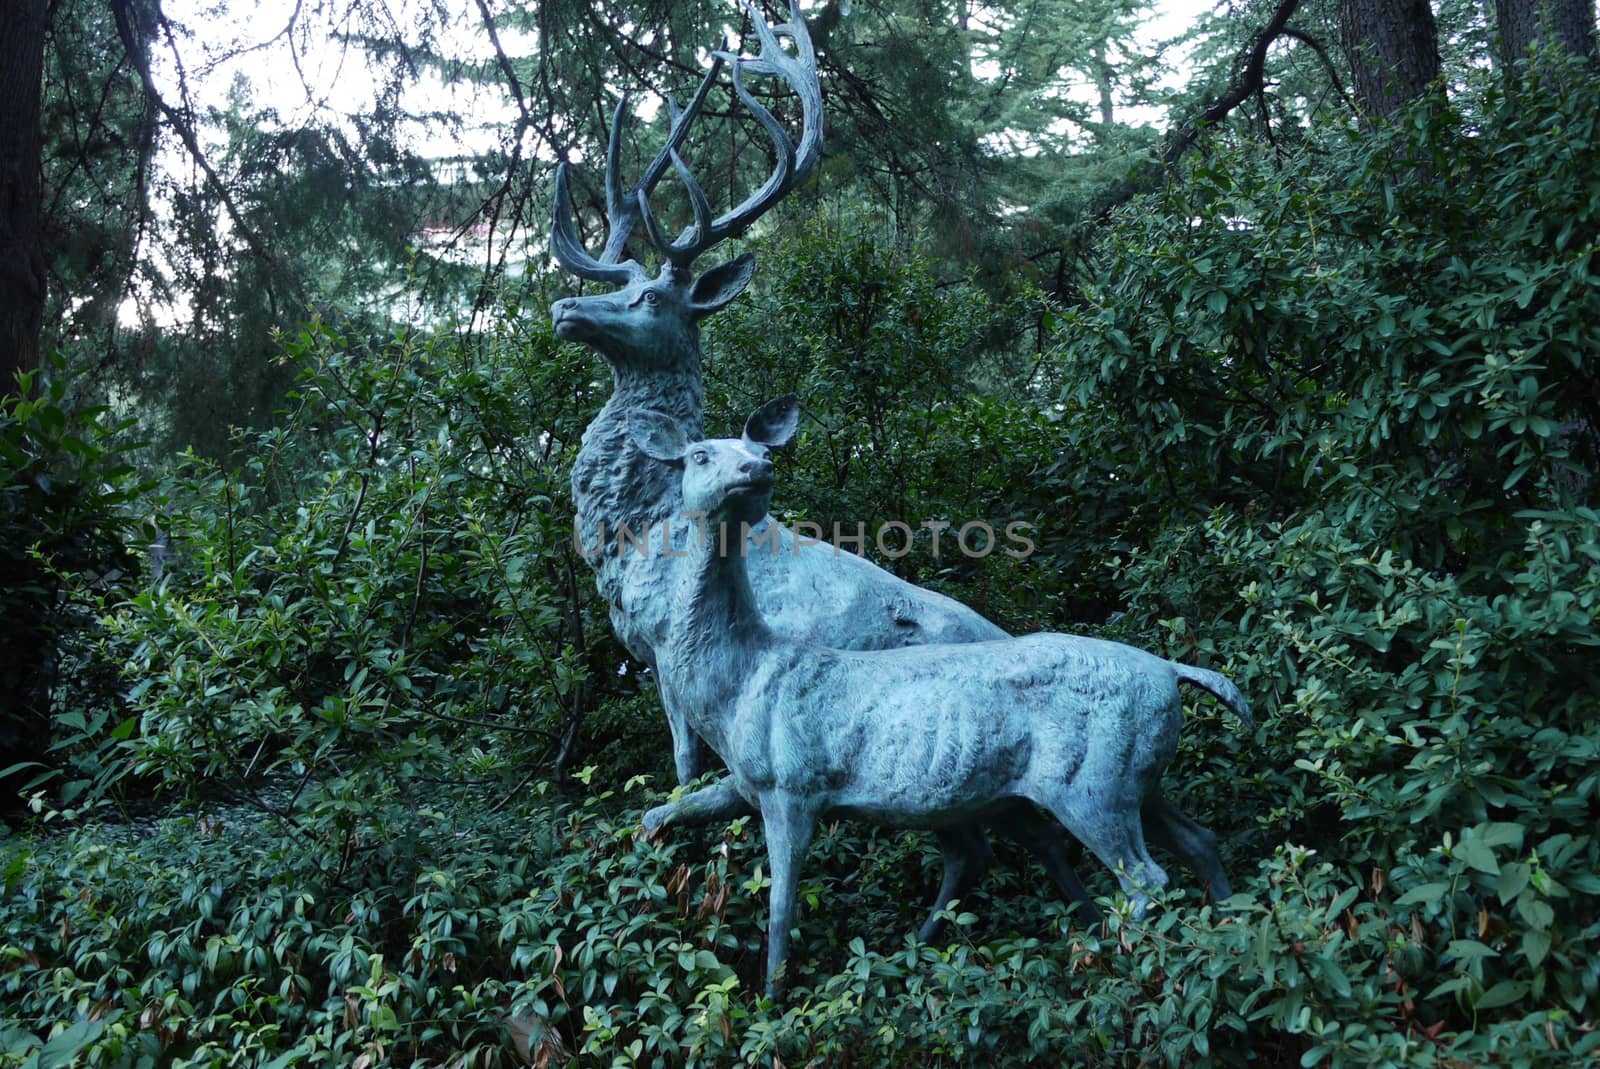 Decorative sculpture depicting two forest animals against a back by Adamchuk